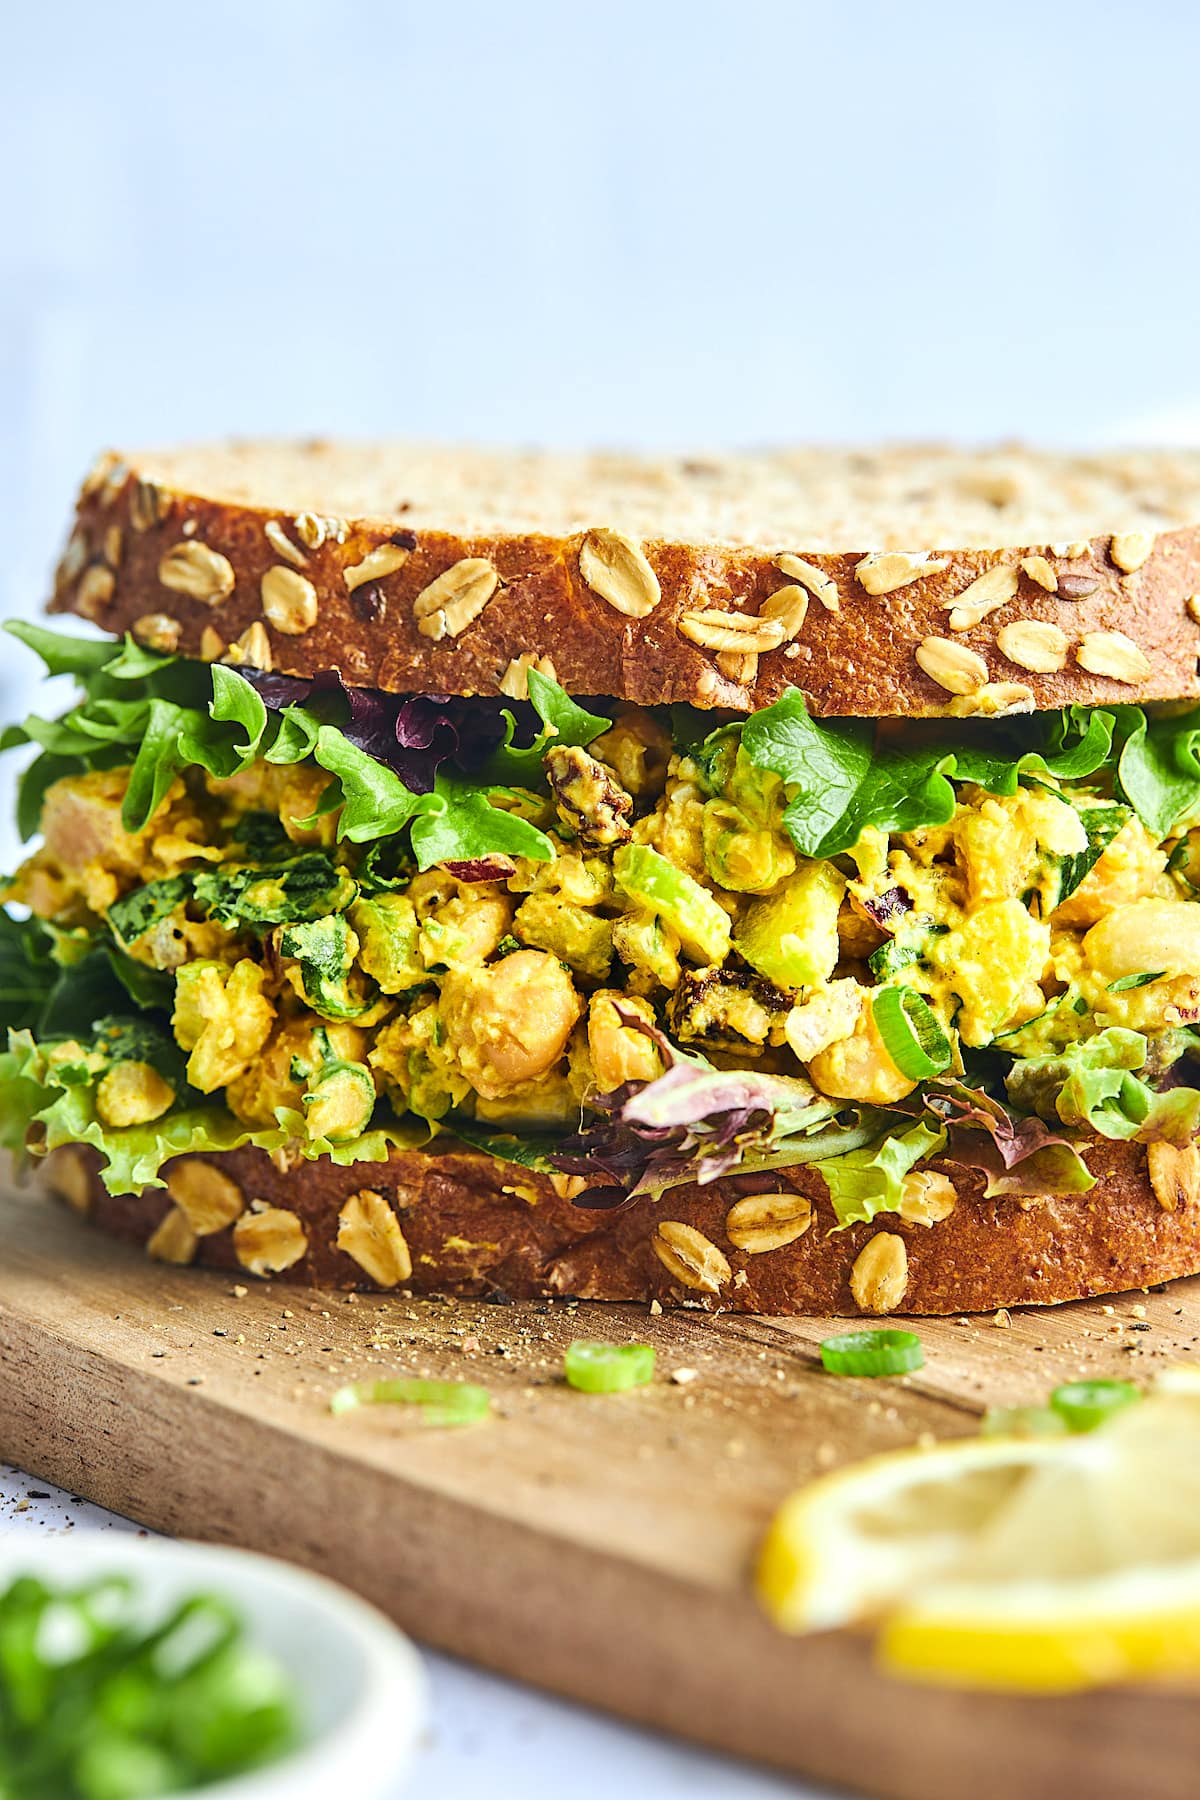 curried chickpea salad in between two slices of whole wheat bread on wood cutting board.